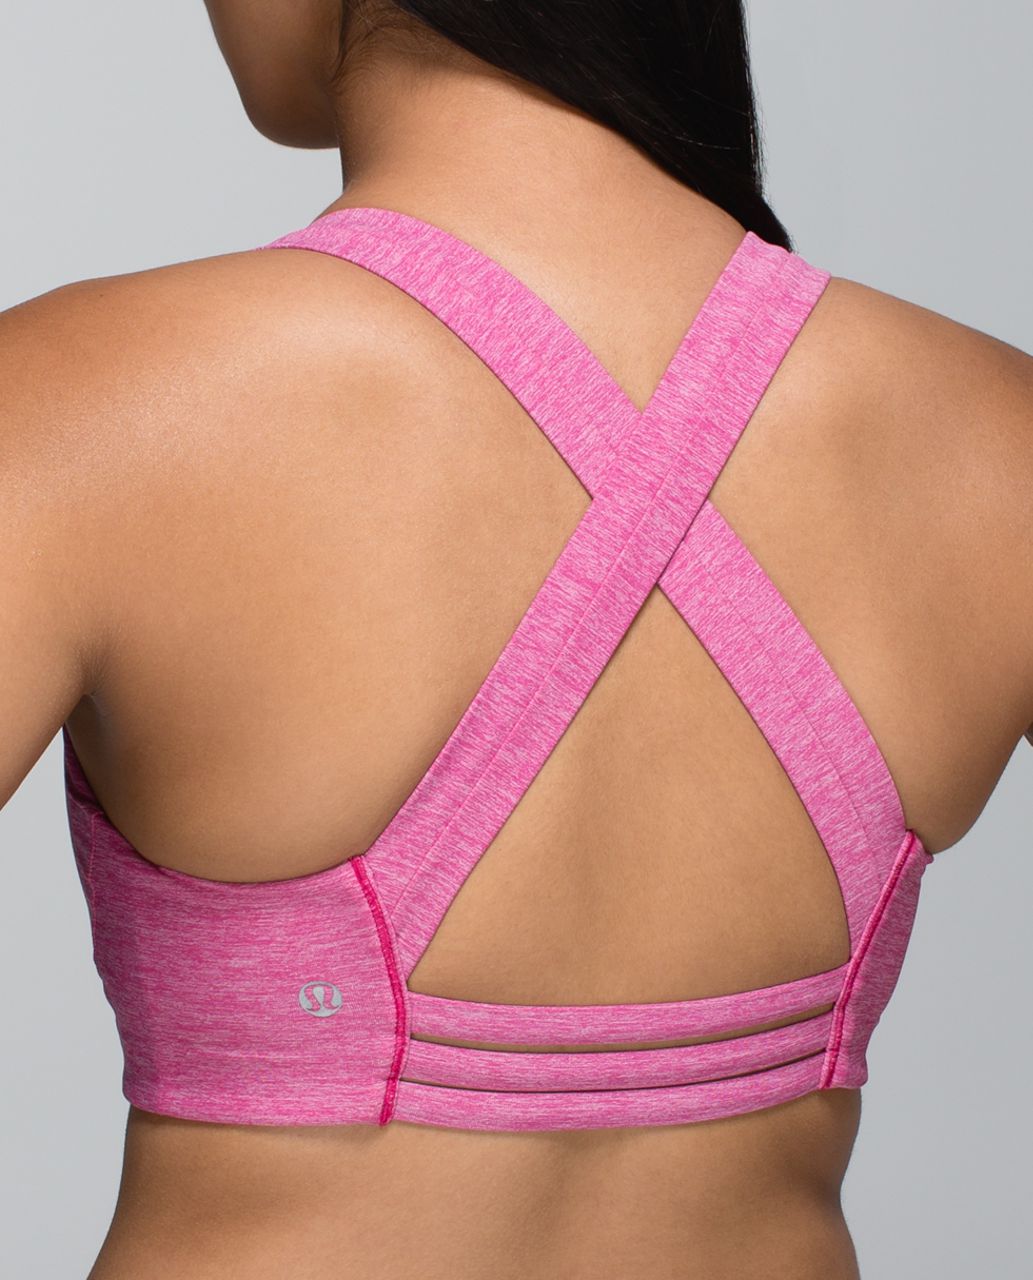 Lululemon On Your Way Bra - Bumble Berry / Heathered Bumble Berry